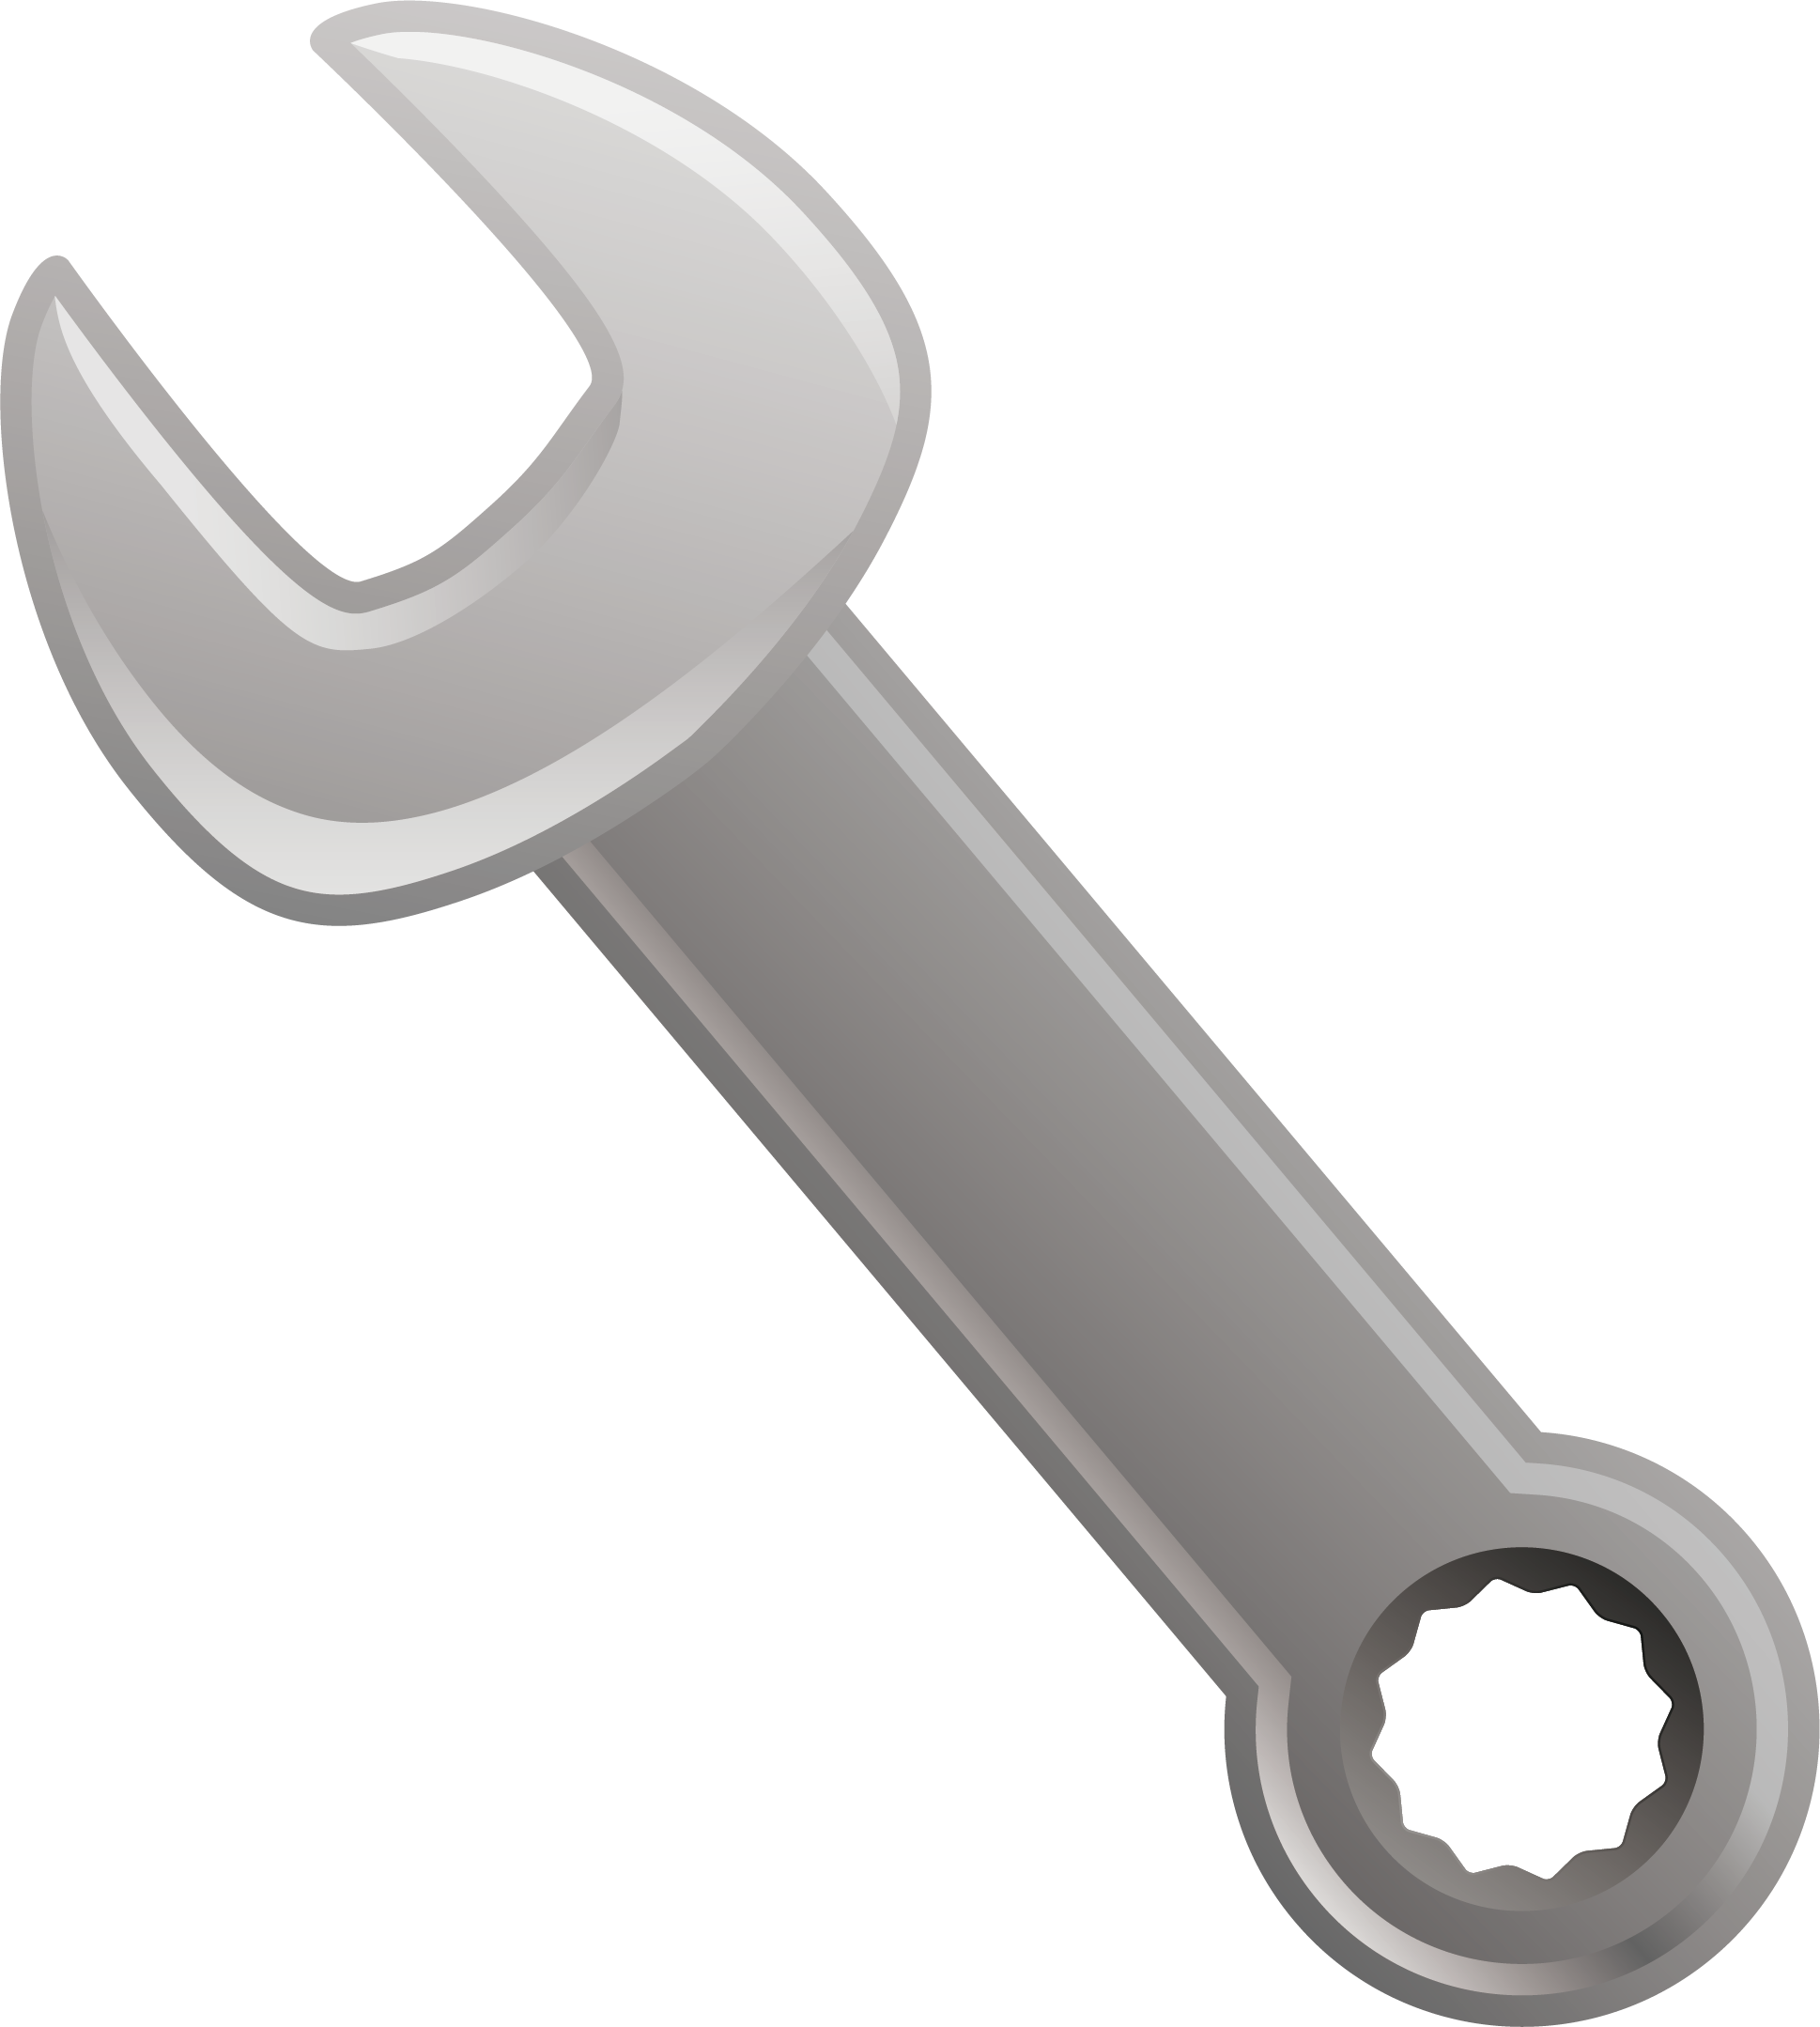 Wrench Tool Screwdriver Clip art